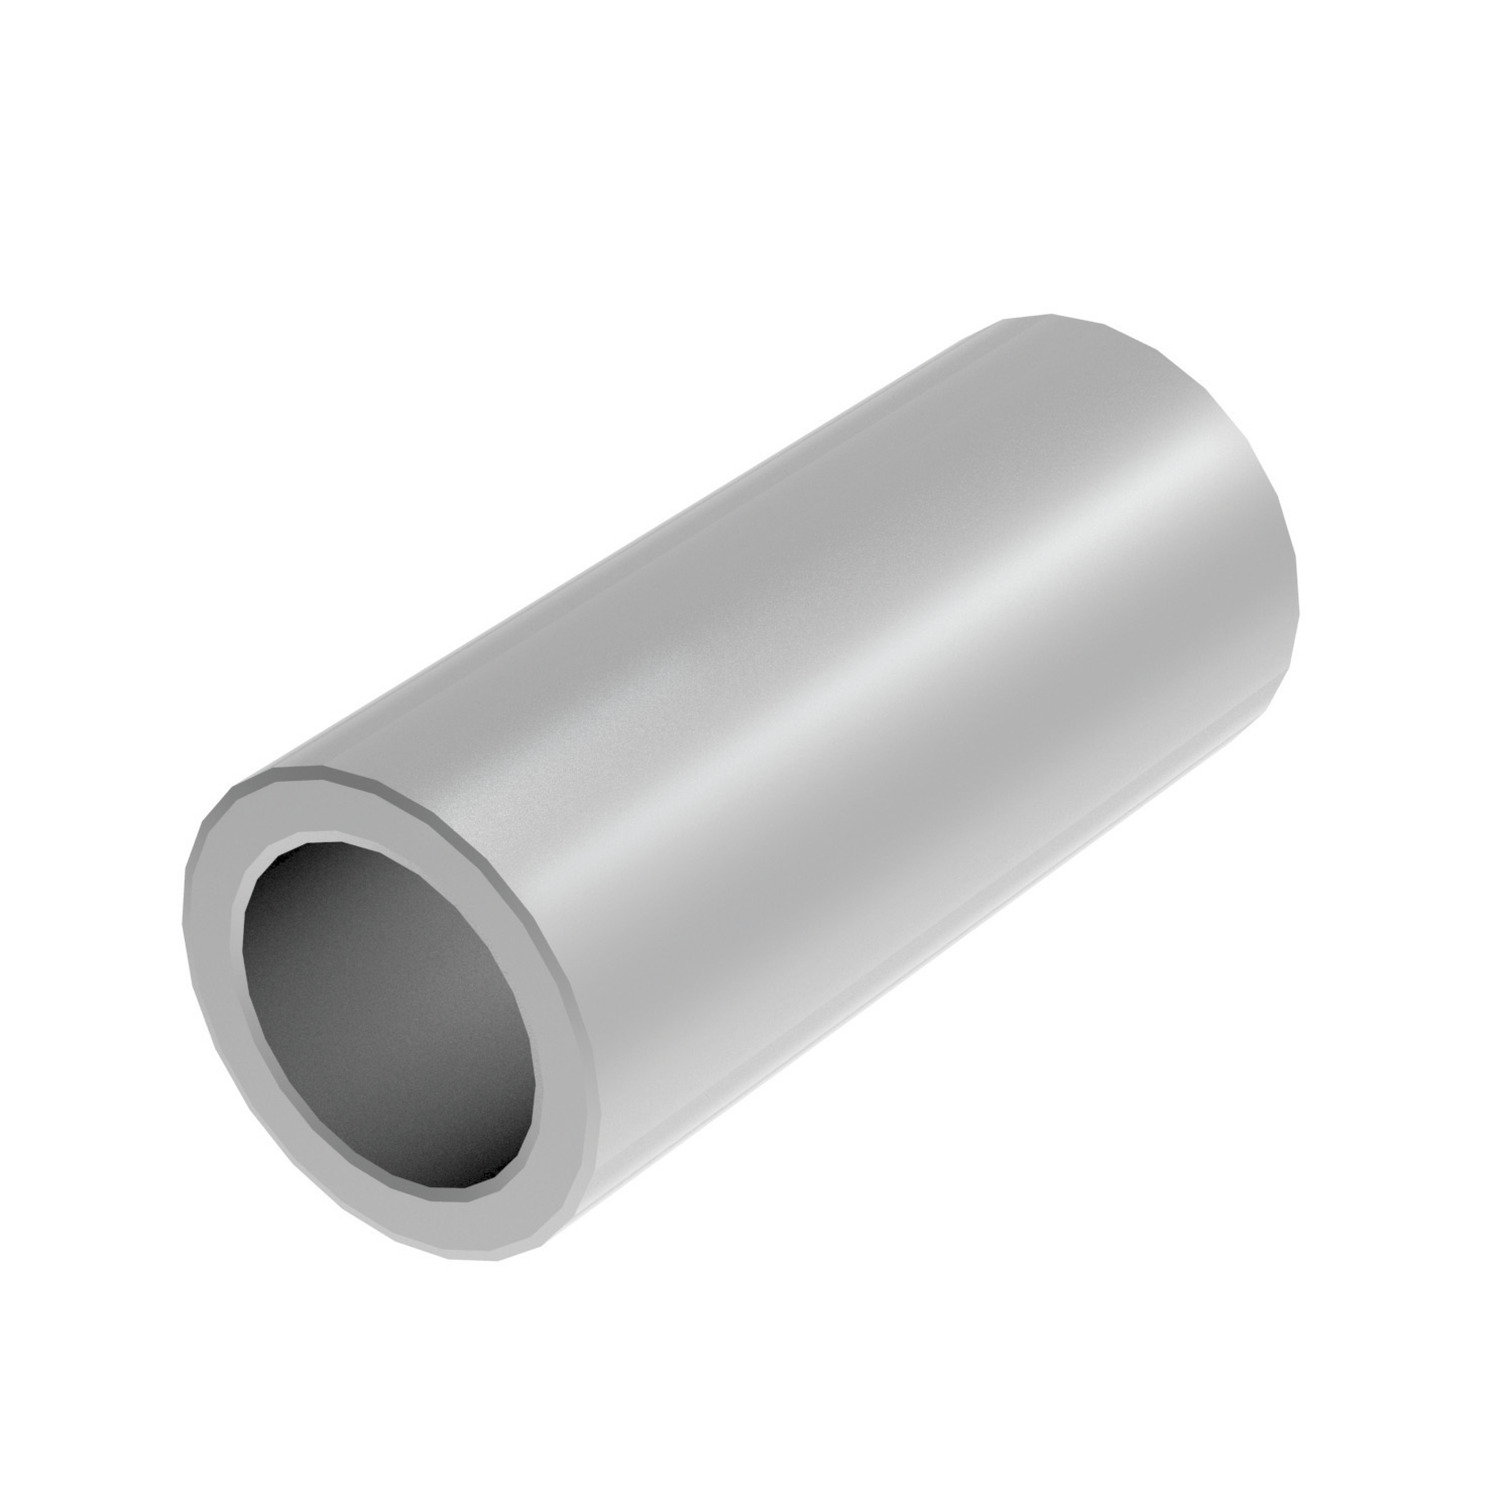 Product P0065.ZP, Steel Clearance Spacers Steel - zinc-plated / 